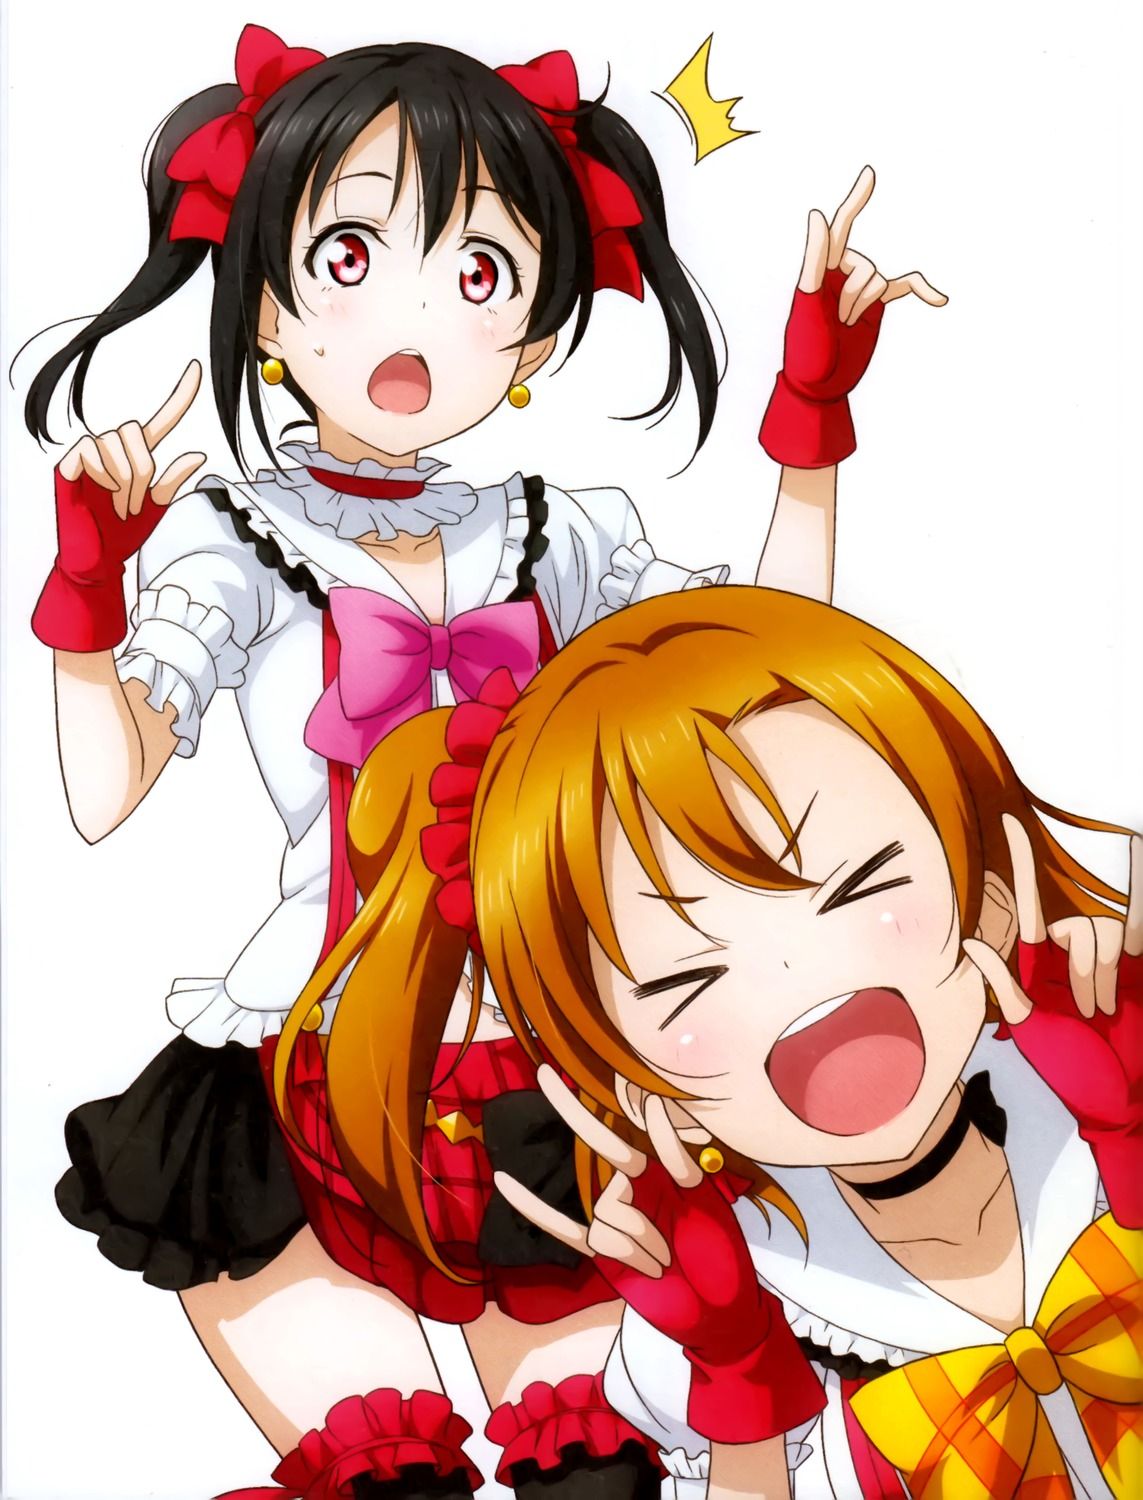 Love live! Wallpaper 05 [15 pictures] 12